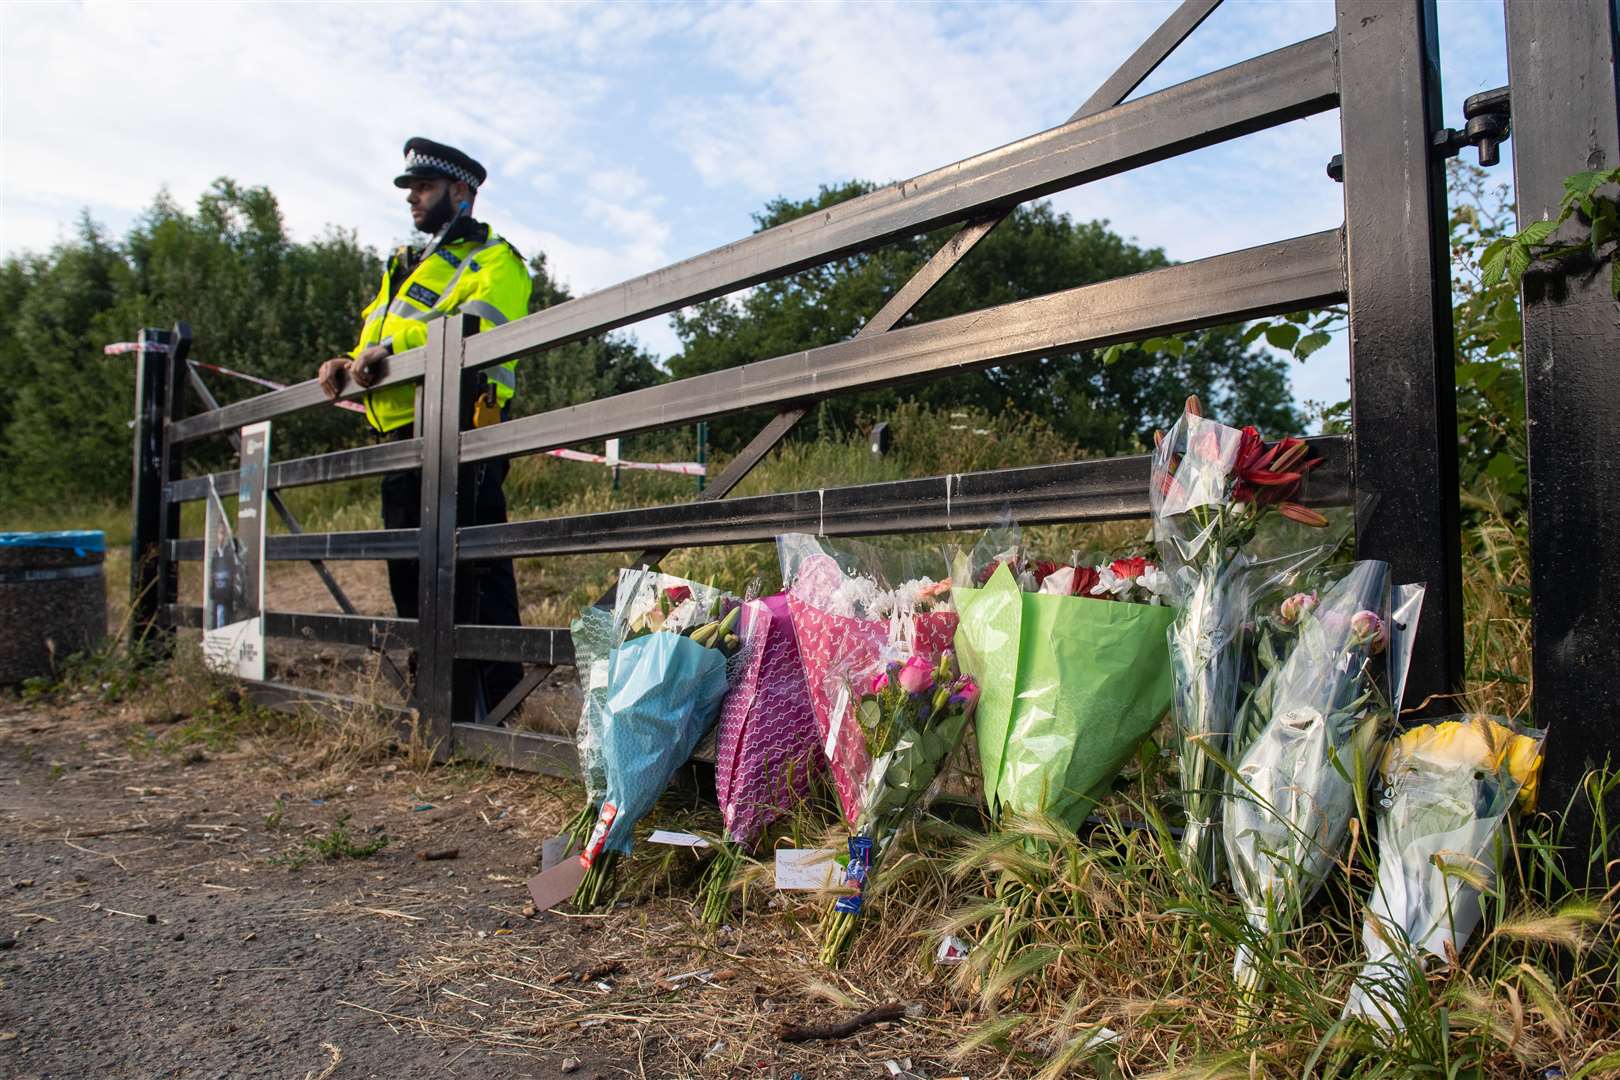 Flowers at an entrance to Fryent Country Park, in Wembley, north-west London, where sisters Bibaa Henry and Nicole Smallman were murdered (Dominic Lipinski/PA)